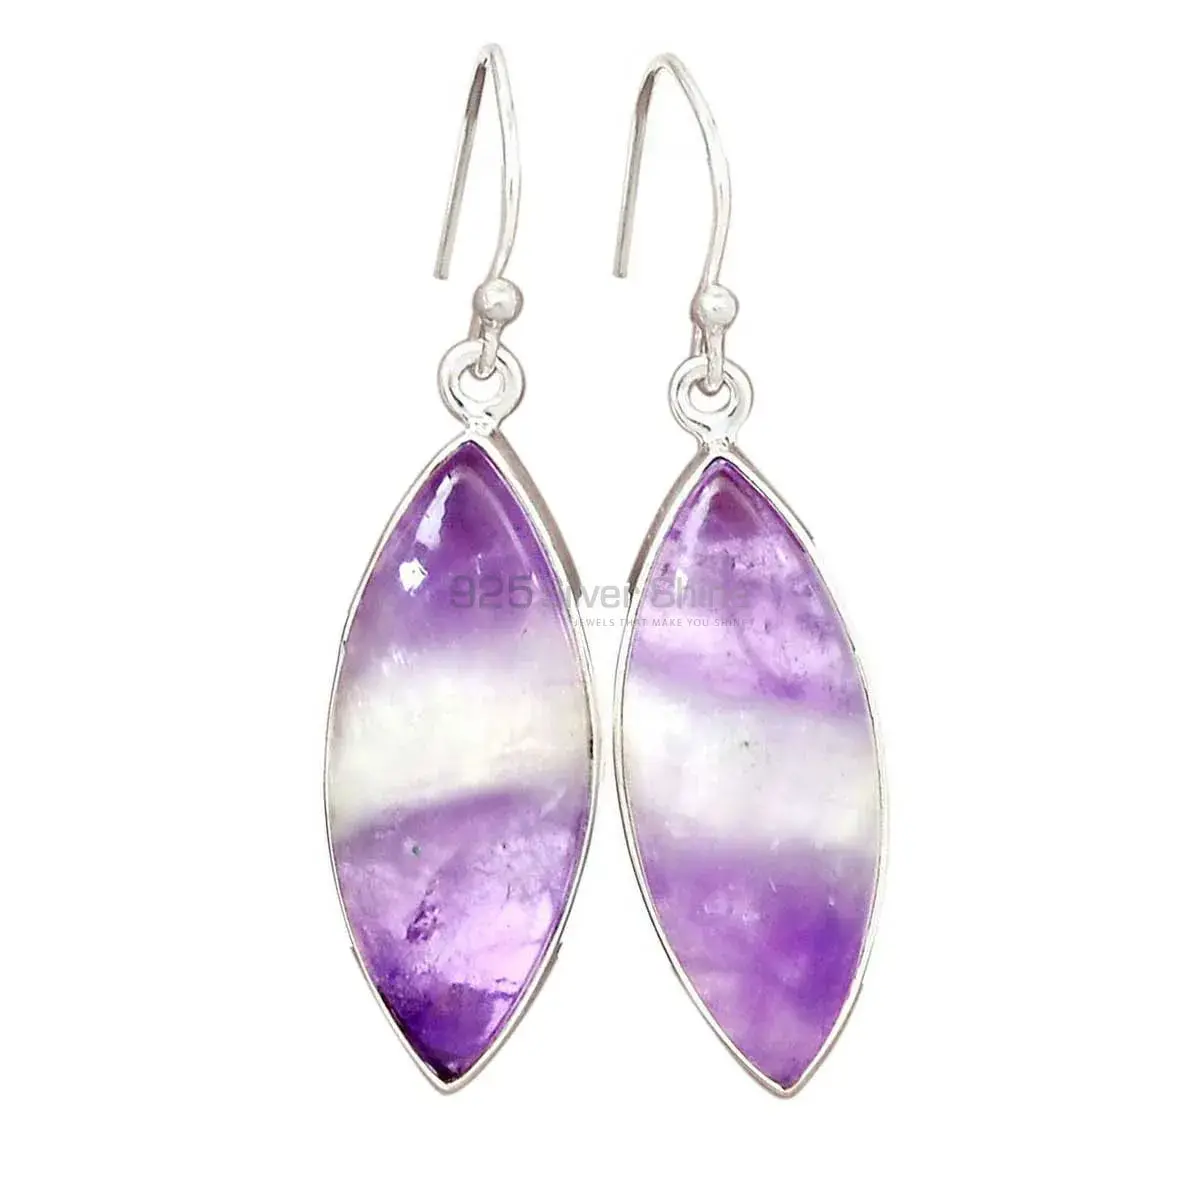 Inexpensive 925 Sterling Silver Earrings Wholesaler In Amethyst Lace agate Gemstone Jewelry 925SE2705_2